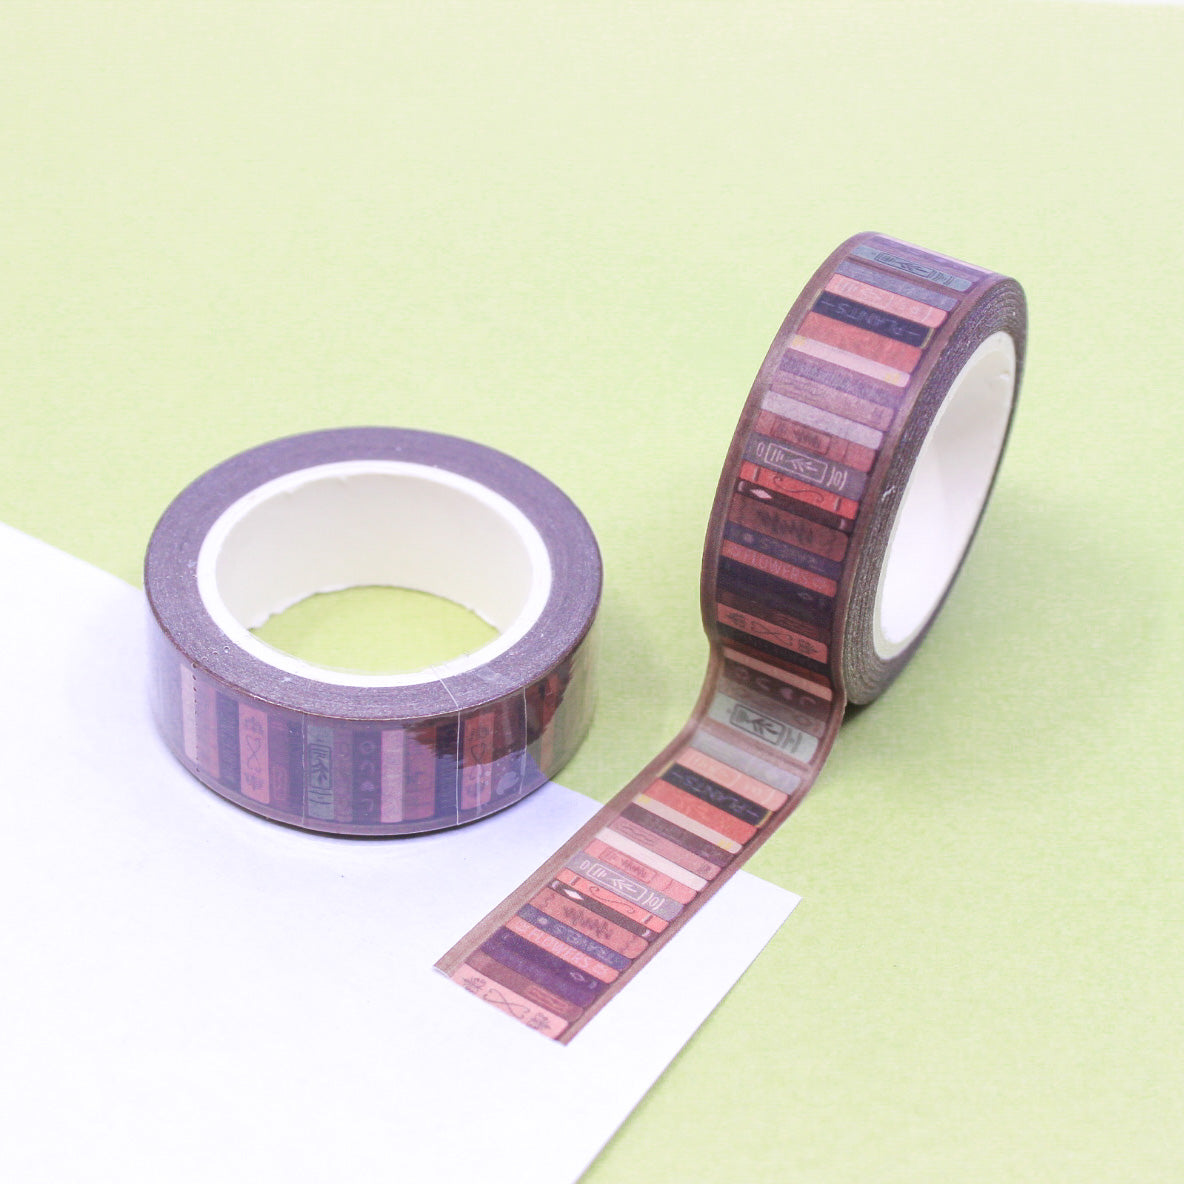 This washi tape features a dark and moody design of a library bookshelf, perfect for adding a touch of vintage charm to your projects, scrapbooks, or journals. This tape is sold at BBB Supplies Craft Shop.